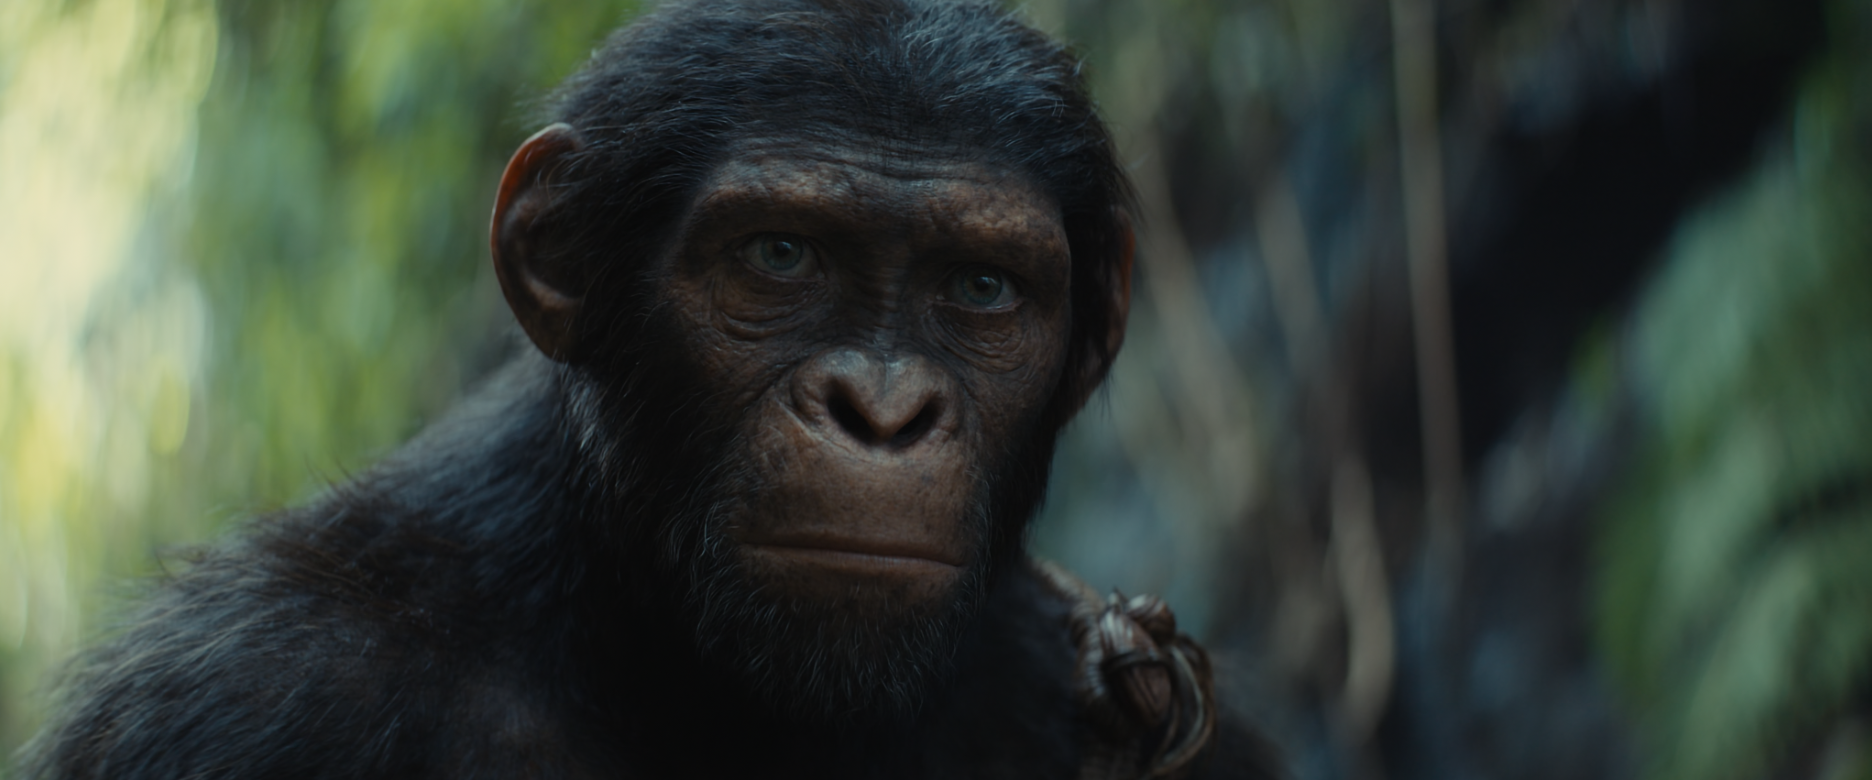 Kingdom of the of the Apes (2024) Trailer 1 2K DTSHD MA and AC3